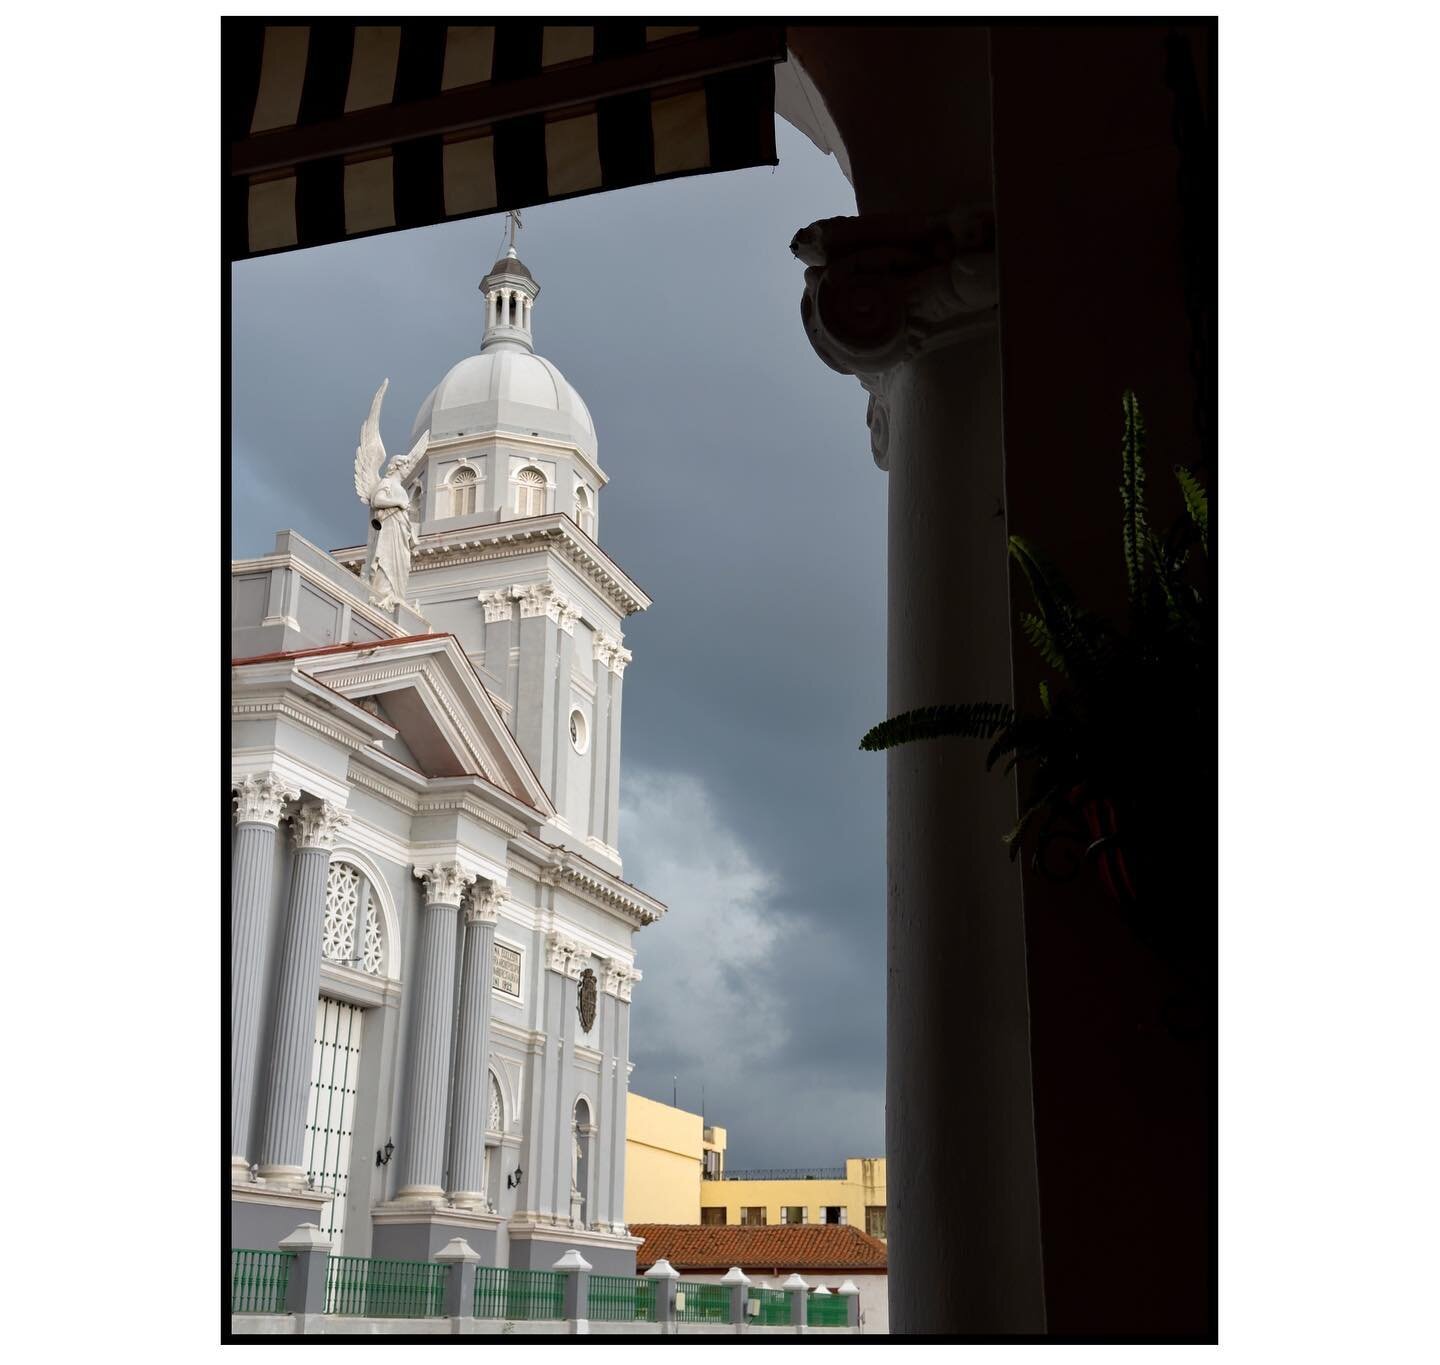 #outmywindow  This is Cuba. The view never gets old as it&rsquo;s always the start of a new adventure.  Join me on a workshop www.cameraodysseys.com  We head to #cuba May 5th to join up with 3 USA #artist to travel across the island from #havana to #